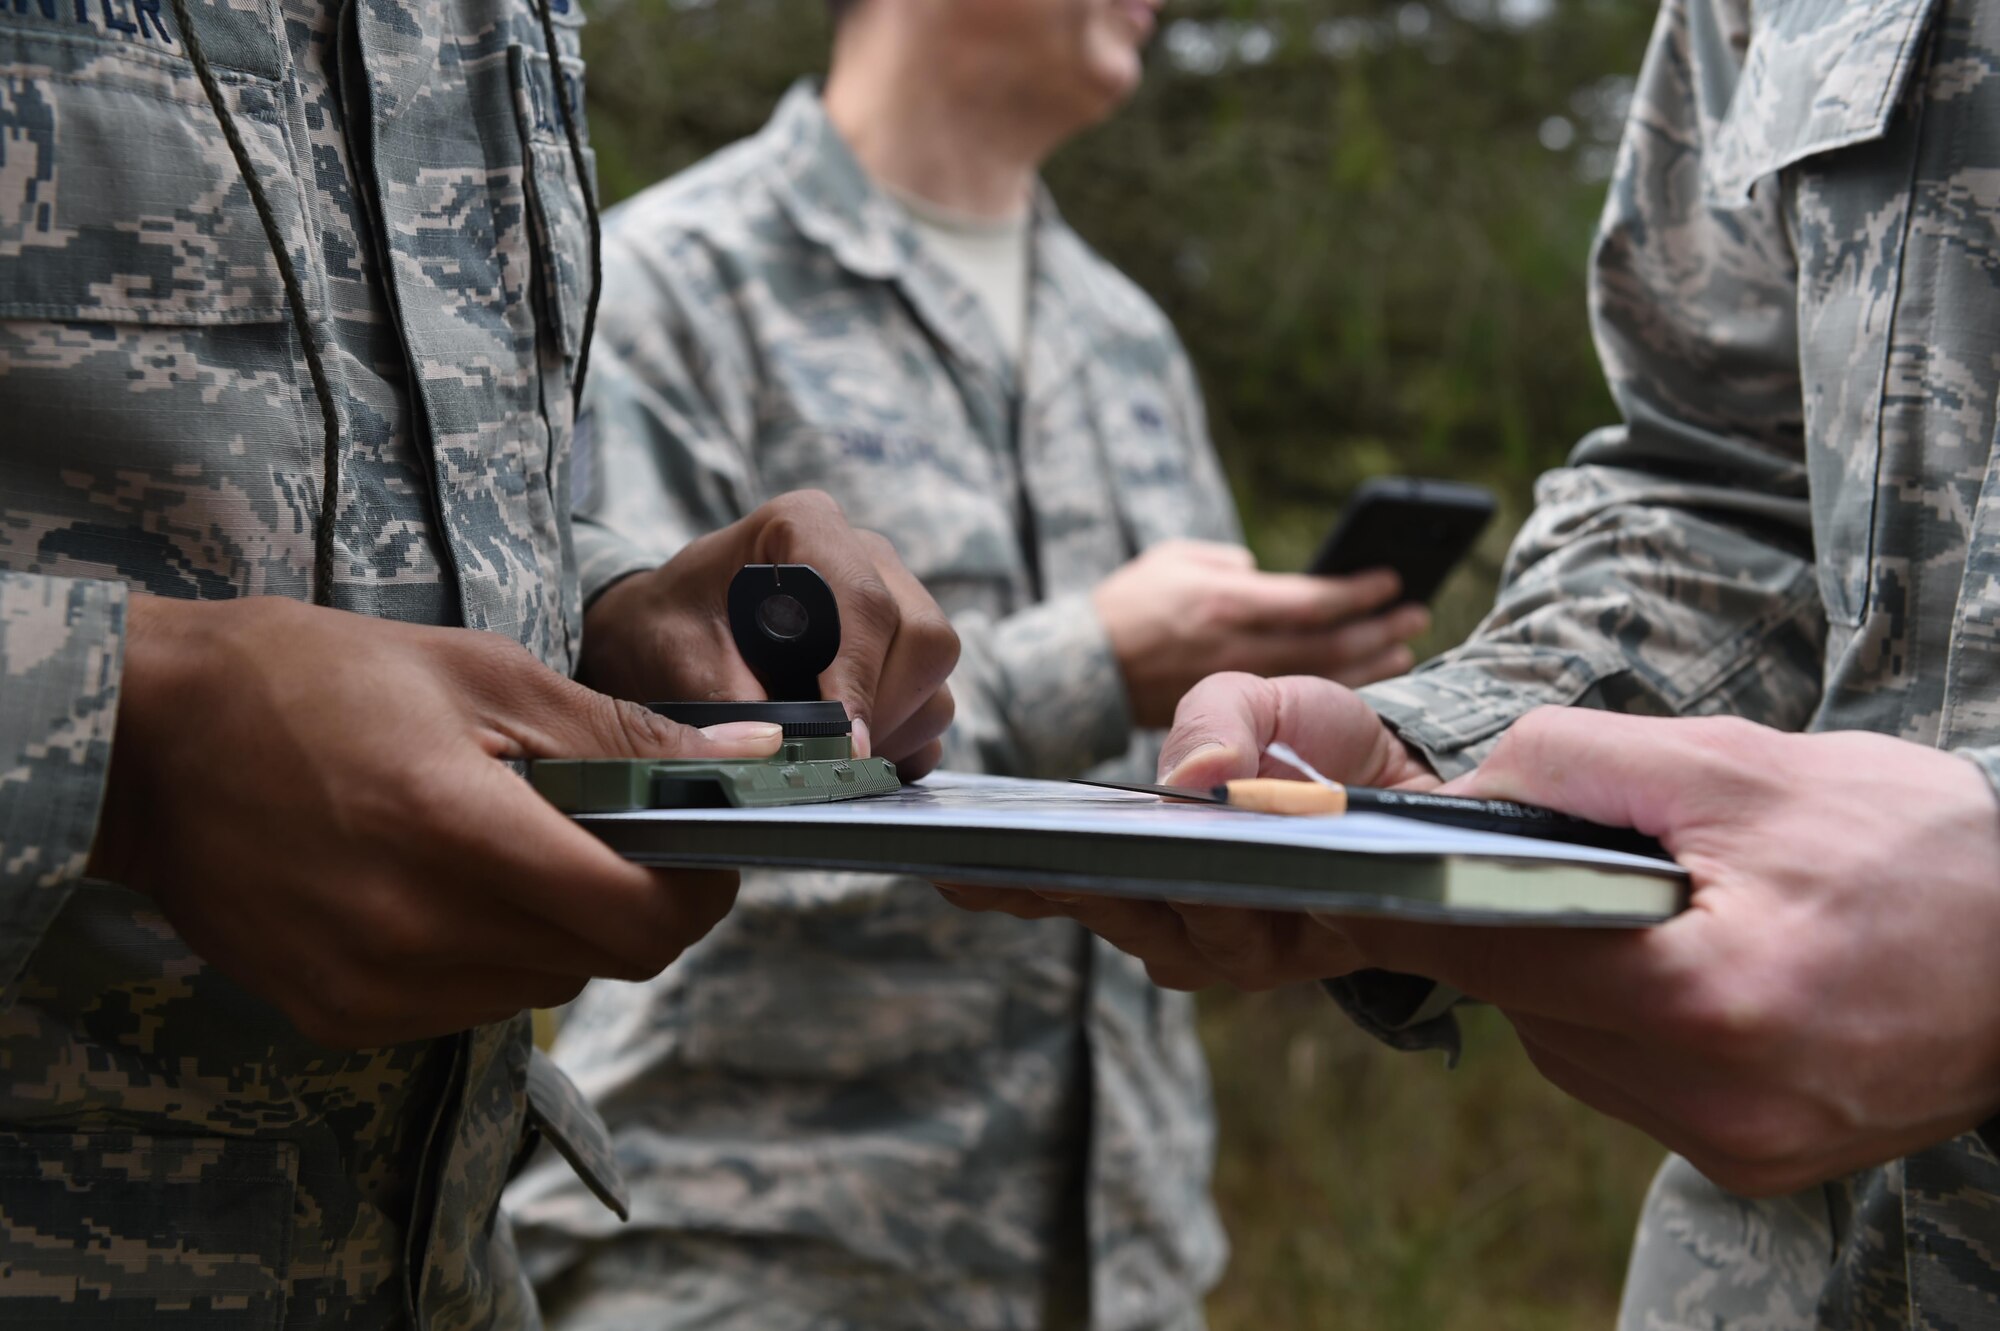 Airmen from the 627th Civil Engineer Squadron hold an azimuth and map during land navigation training on Joint Base Lewis-McChord, Wash., Feb. 16, 2017. The 627th CES typically conducts joint land navigation and convoy training with the Army prior to deployments where they will be working outside the wire, but this time they teamed up with the 627th Security Forces Squadron. (U.S. Air Force photo/Staff Sgt. Naomi Shipley)